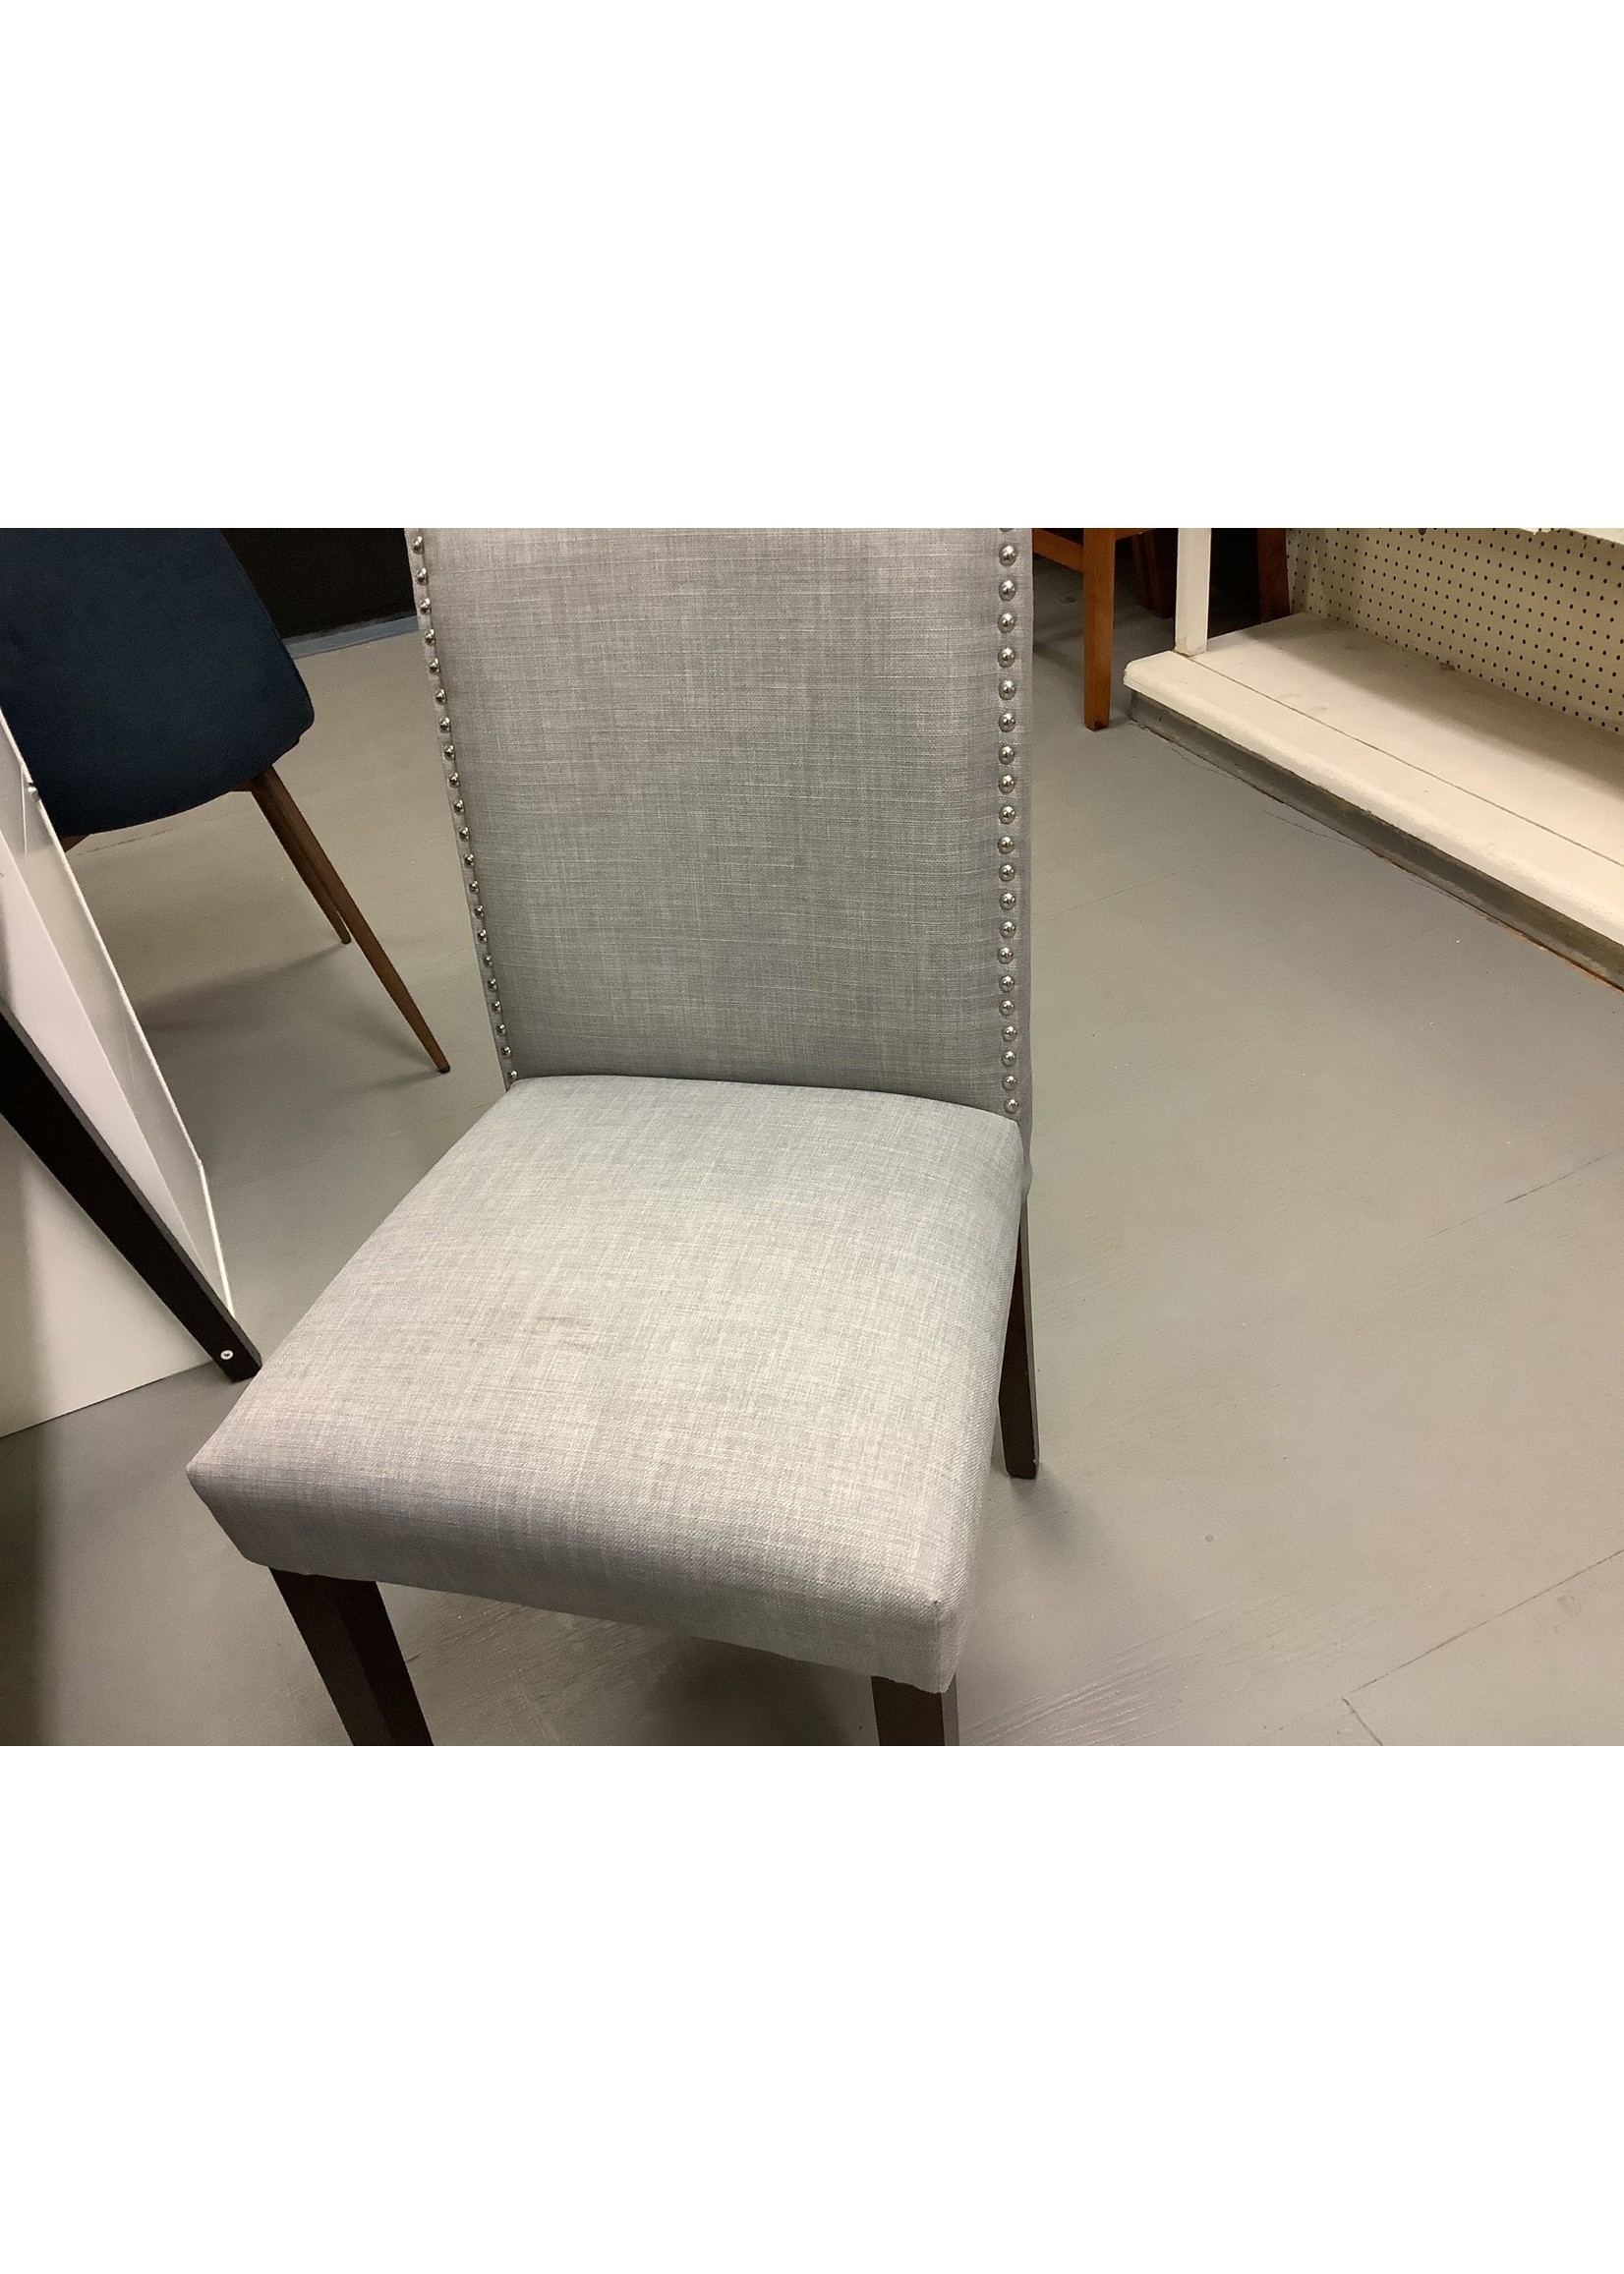 Small stain on seat Camelot Nailhead Dining Chair Dove Gray - Threshold